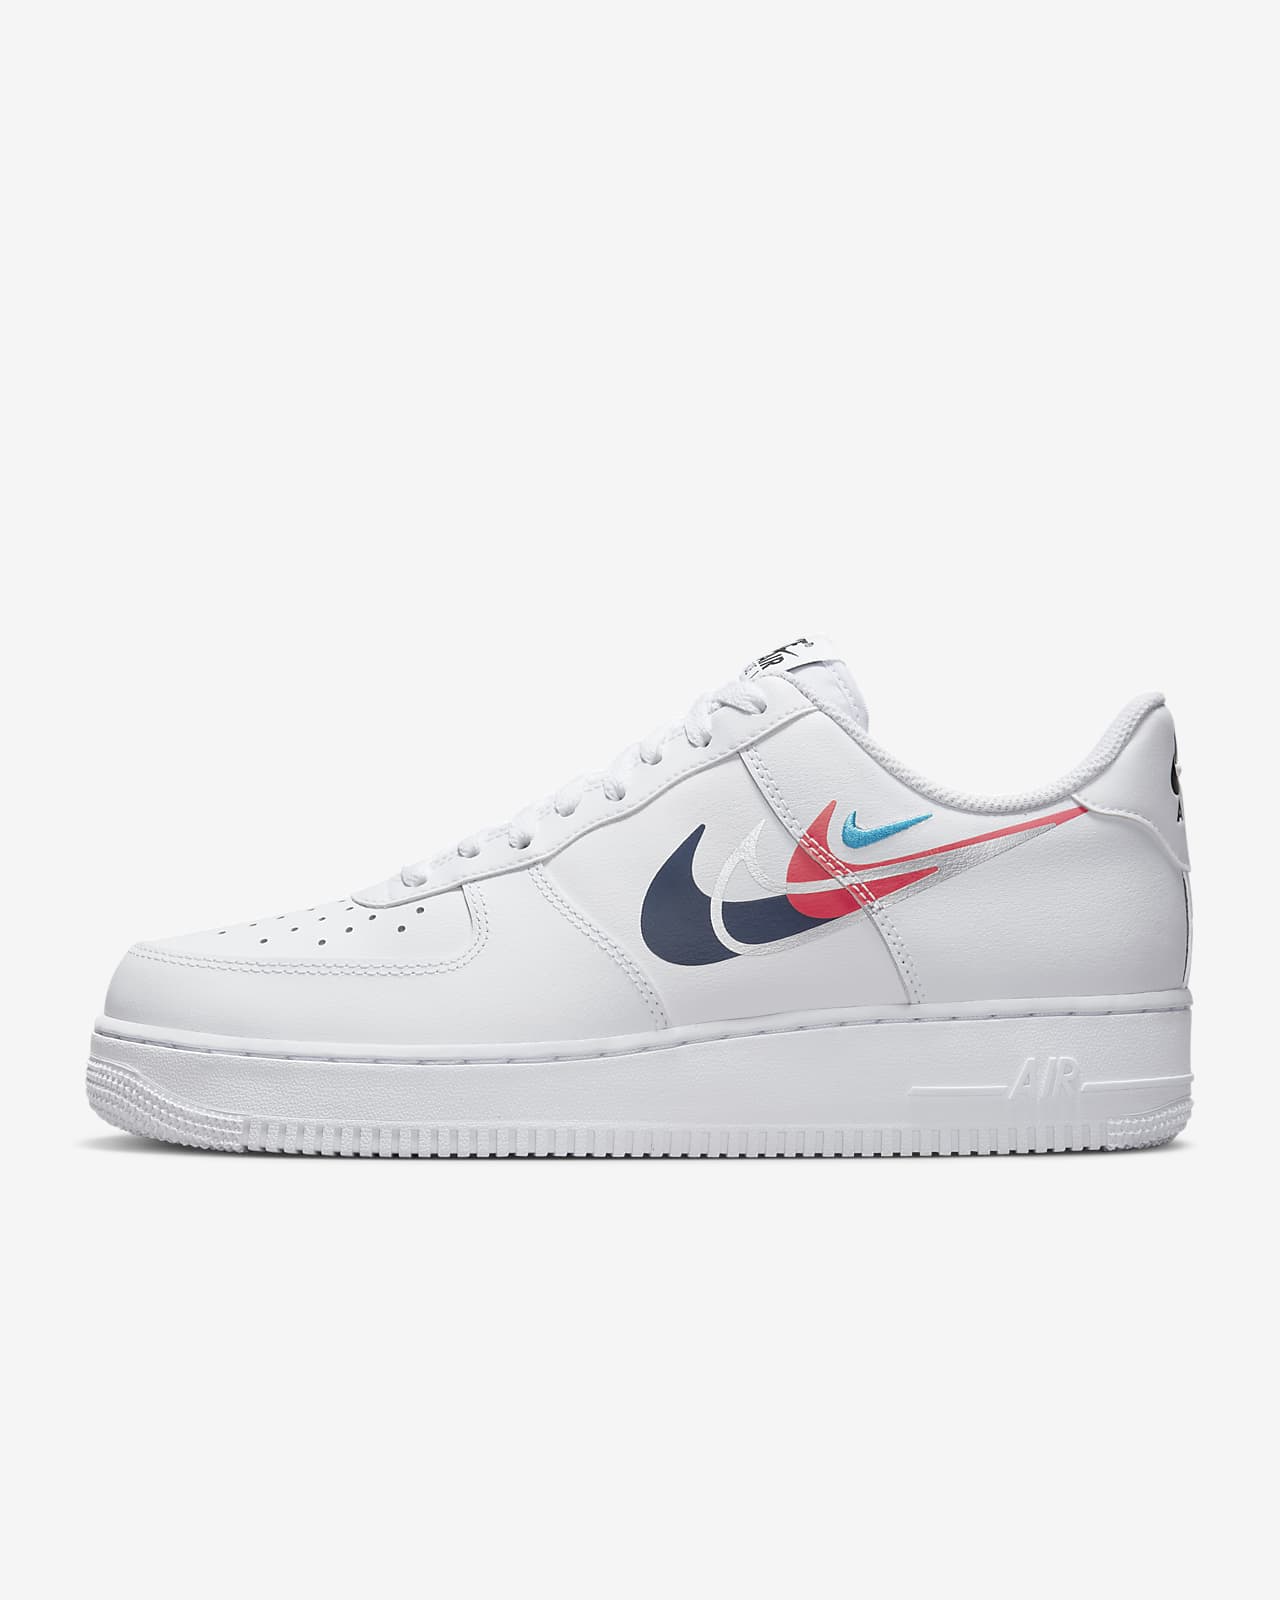 Nike Air Force 1 '07 LV8 Midnight Navy Men's Size 13